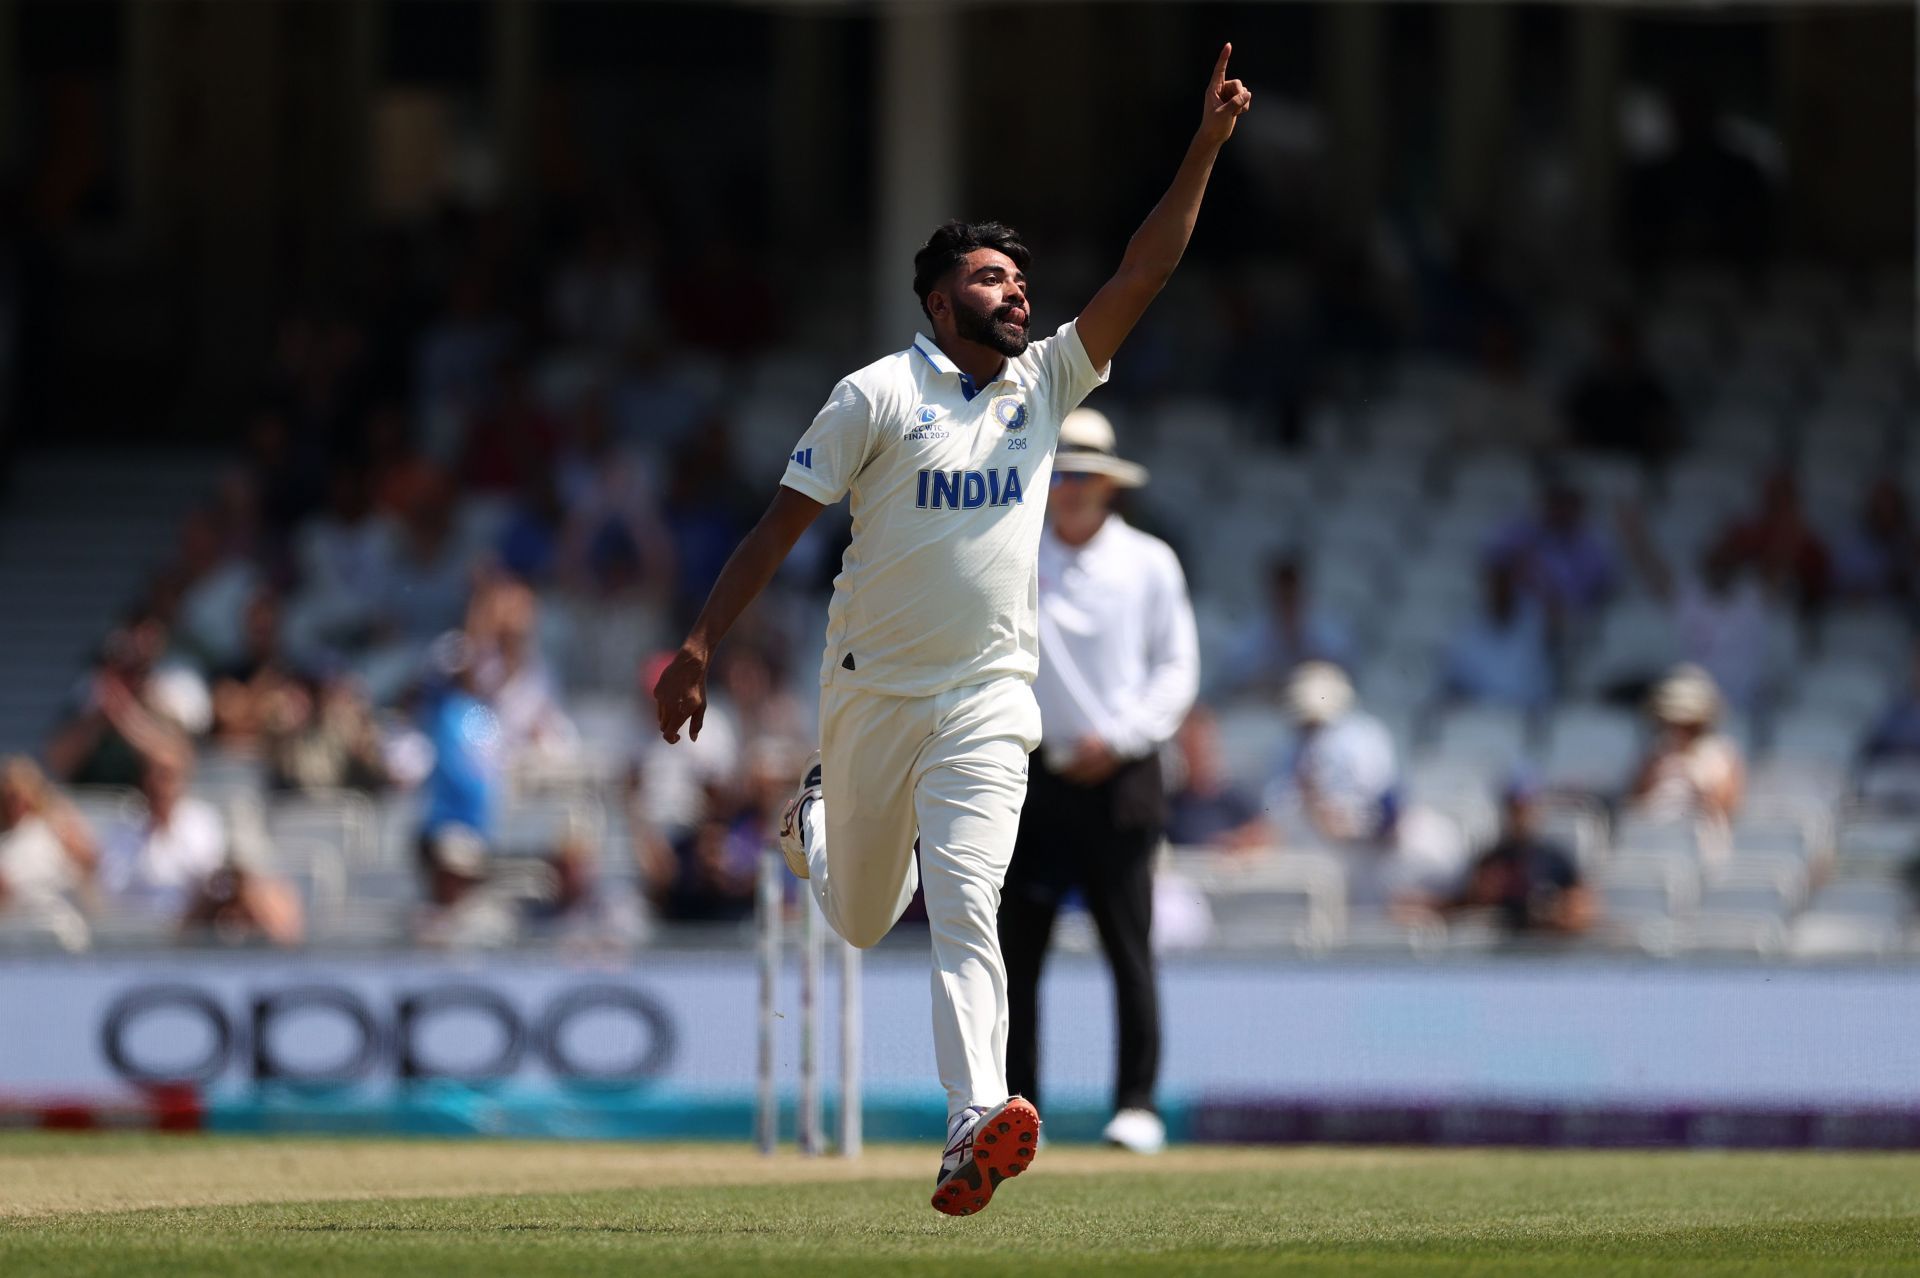 Mohammed Siraj gave India their first breakthrough by dismissing David Warner.